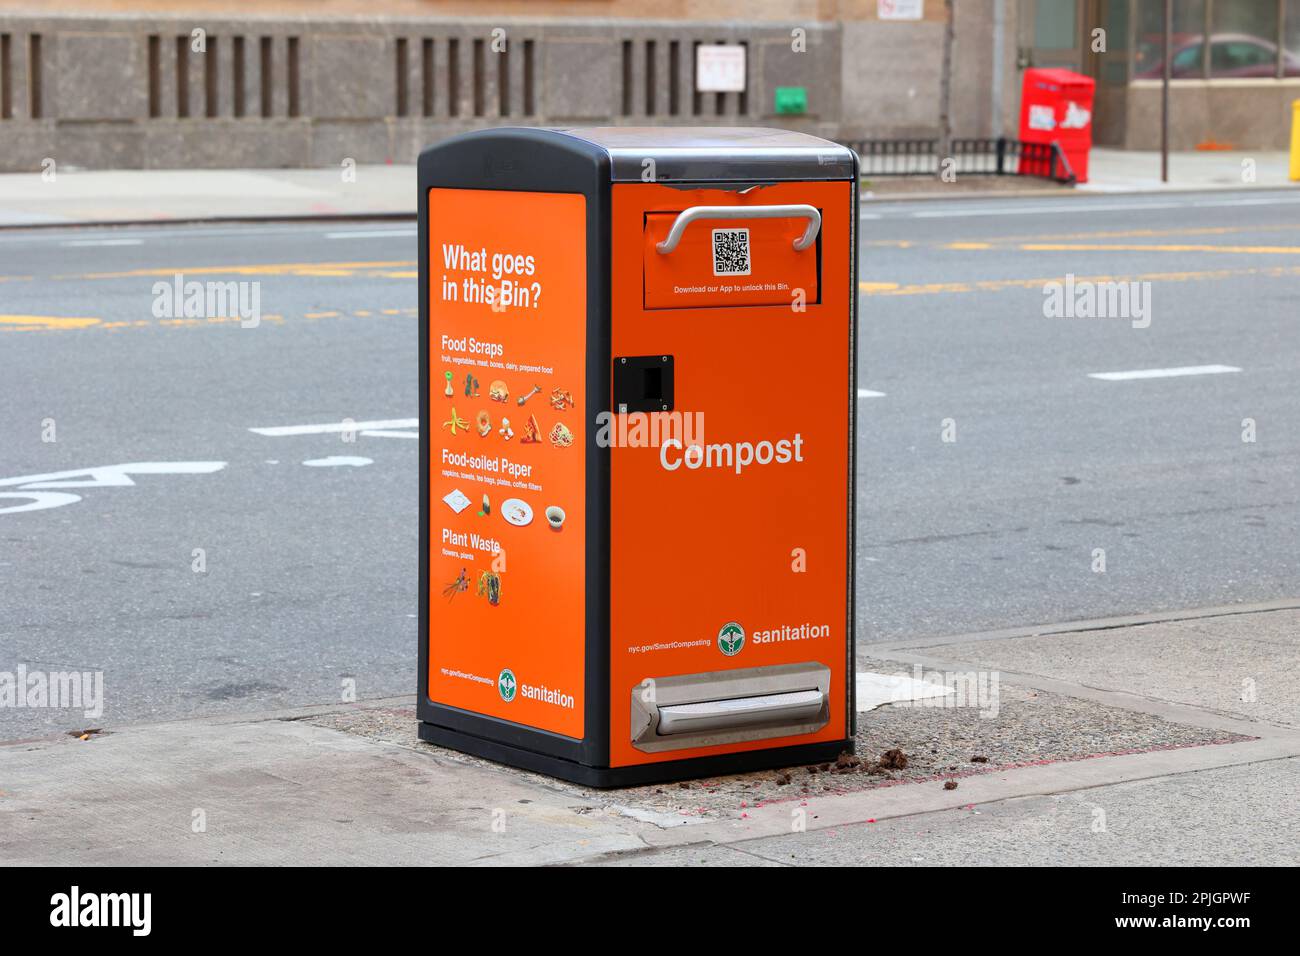 A NYC Smart Compost bin on a street in Upper Manhattan, New York City. These collection bins are unlocked via an app. Compost contents are liquified ... Stock Photo